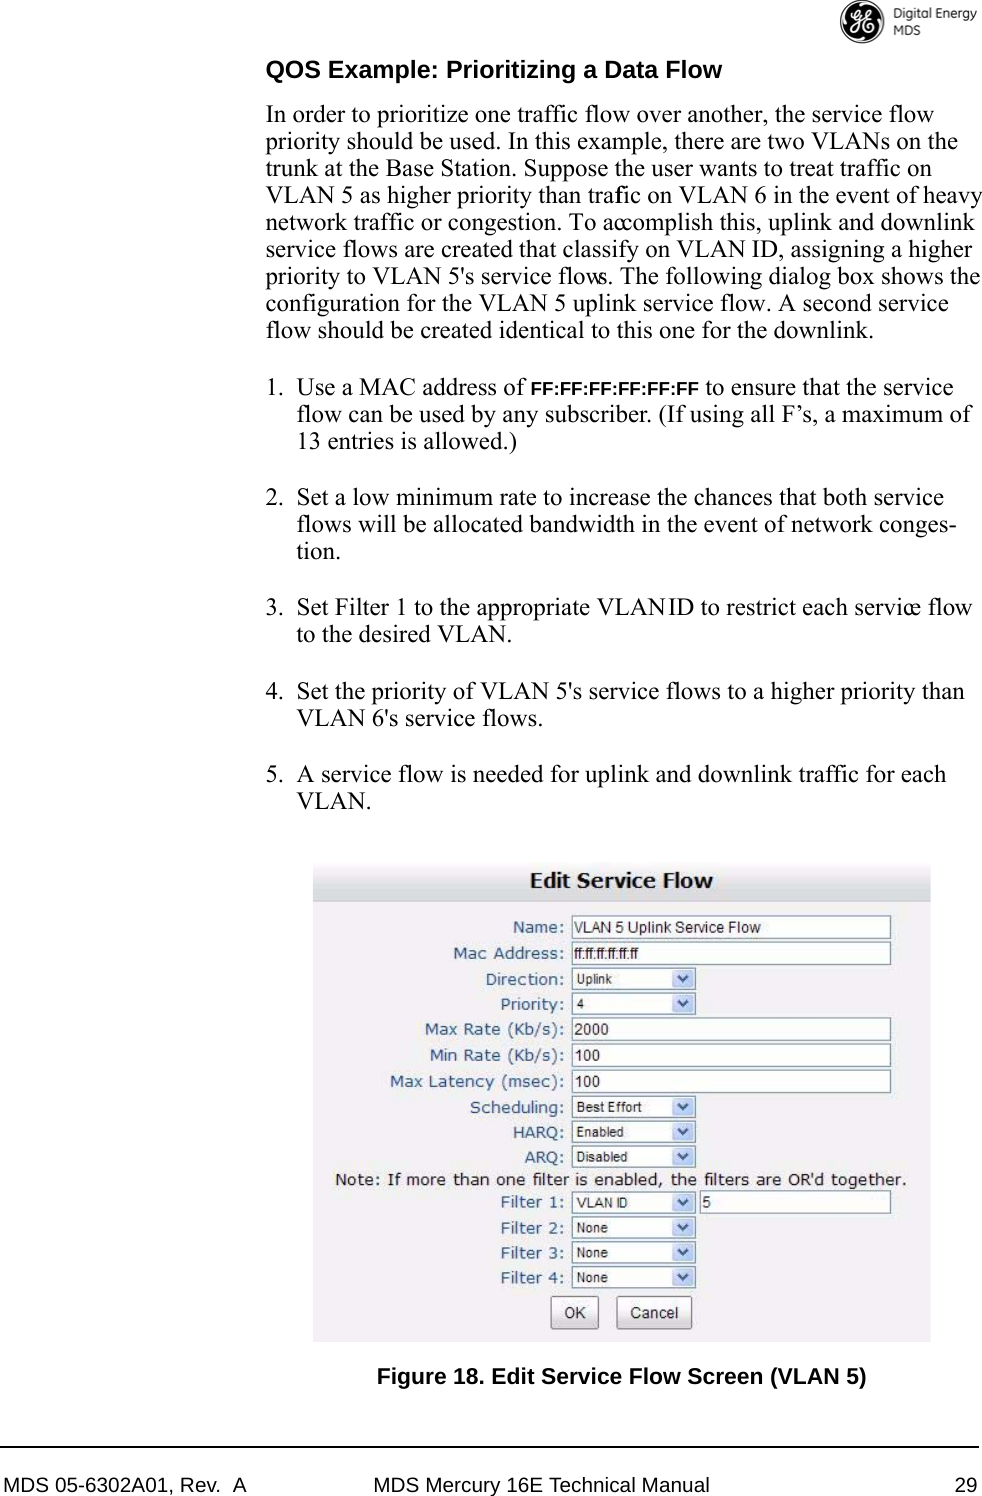 MDS 05-6302A01, Rev.  A MDS Mercury 16E Technical Manual 29QOS Example: Prioritizing a Data FlowIn order to prioritize one traffic flow over another, the service flow priority should be used. In this example, there are two VLANs on the trunk at the Base Station. Suppose the user wants to treat traffic on VLAN 5 as higher priority than traffic on VLAN 6 in the event of heavy network traffic or congestion. To accomplish this, uplink and downlink service flows are created that classify on VLAN ID, assigning a higher priority to VLAN 5&apos;s service flows. The following dialog box shows the configuration for the VLAN 5 uplink service flow. A second service flow should be created identical to this one for the downlink.1. Use a MAC address of FF:FF:FF:FF:FF:FF to ensure that the service flow can be used by any subscriber. (If using all F’s, a maximum of 13 entries is allowed.)2. Set a low minimum rate to increase the chances that both service flows will be allocated bandwidth in the event of network conges-tion. 3. Set Filter 1 to the appropriate VLAN ID to restrict each service flow to the desired VLAN.4. Set the priority of VLAN 5&apos;s service flows to a higher priority than VLAN 6&apos;s service flows.5. A service flow is needed for uplink and downlink traffic for each VLAN.Invisible place holderFigure 18. Edit Service Flow Screen (VLAN 5)